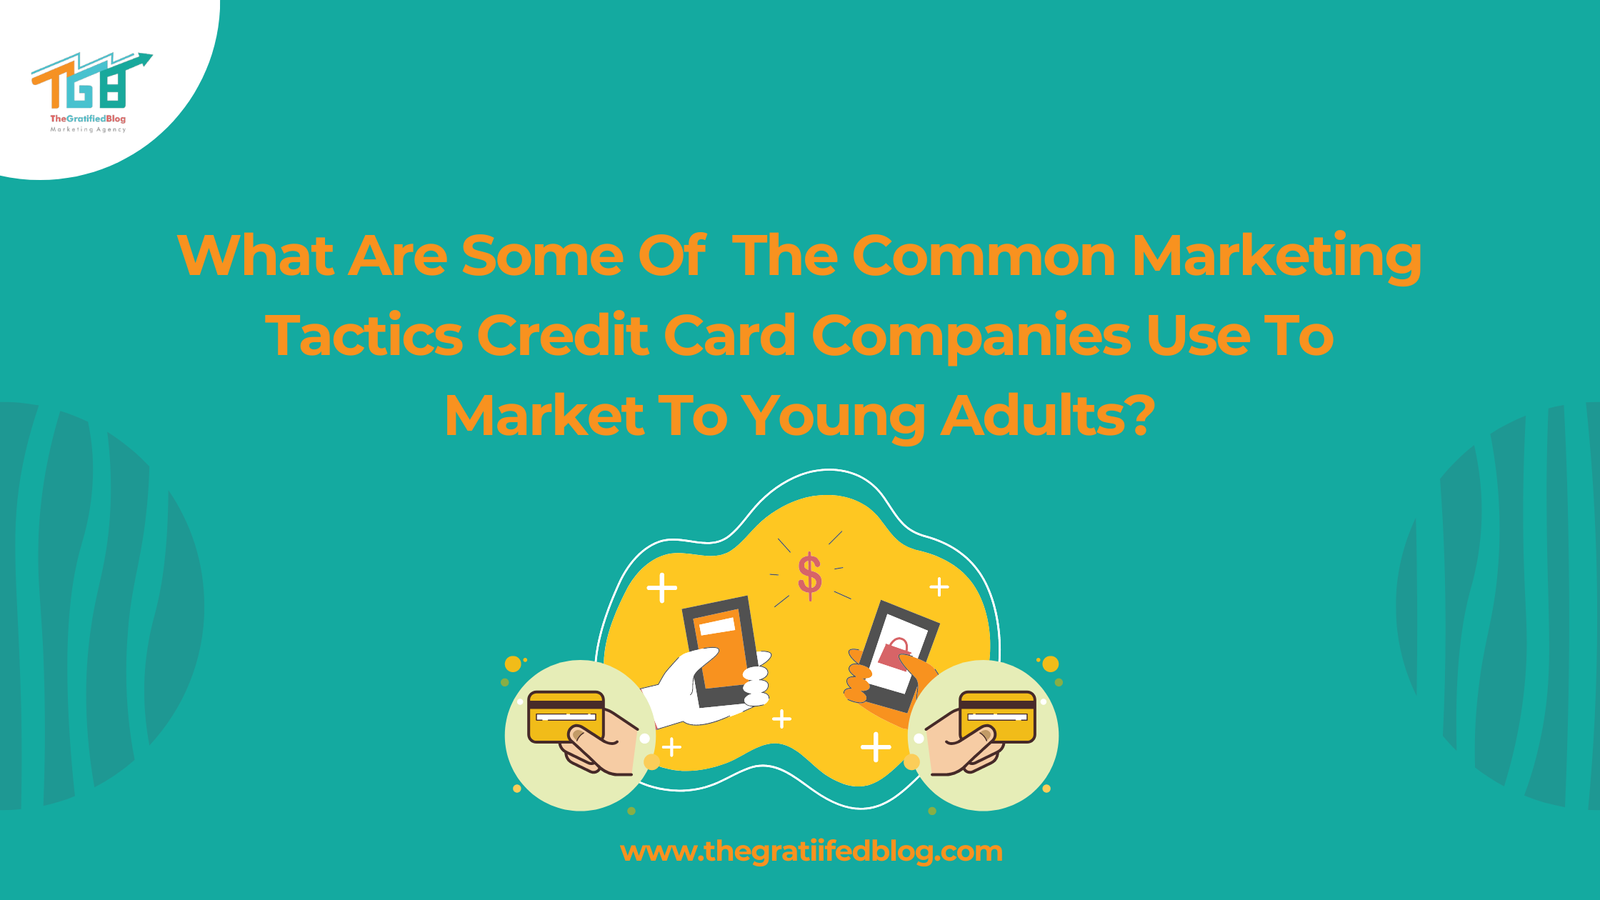 What are Some of the Common Marketing Tactics Credit Card Companies Use to Market to Young Adults: Strategic Insights